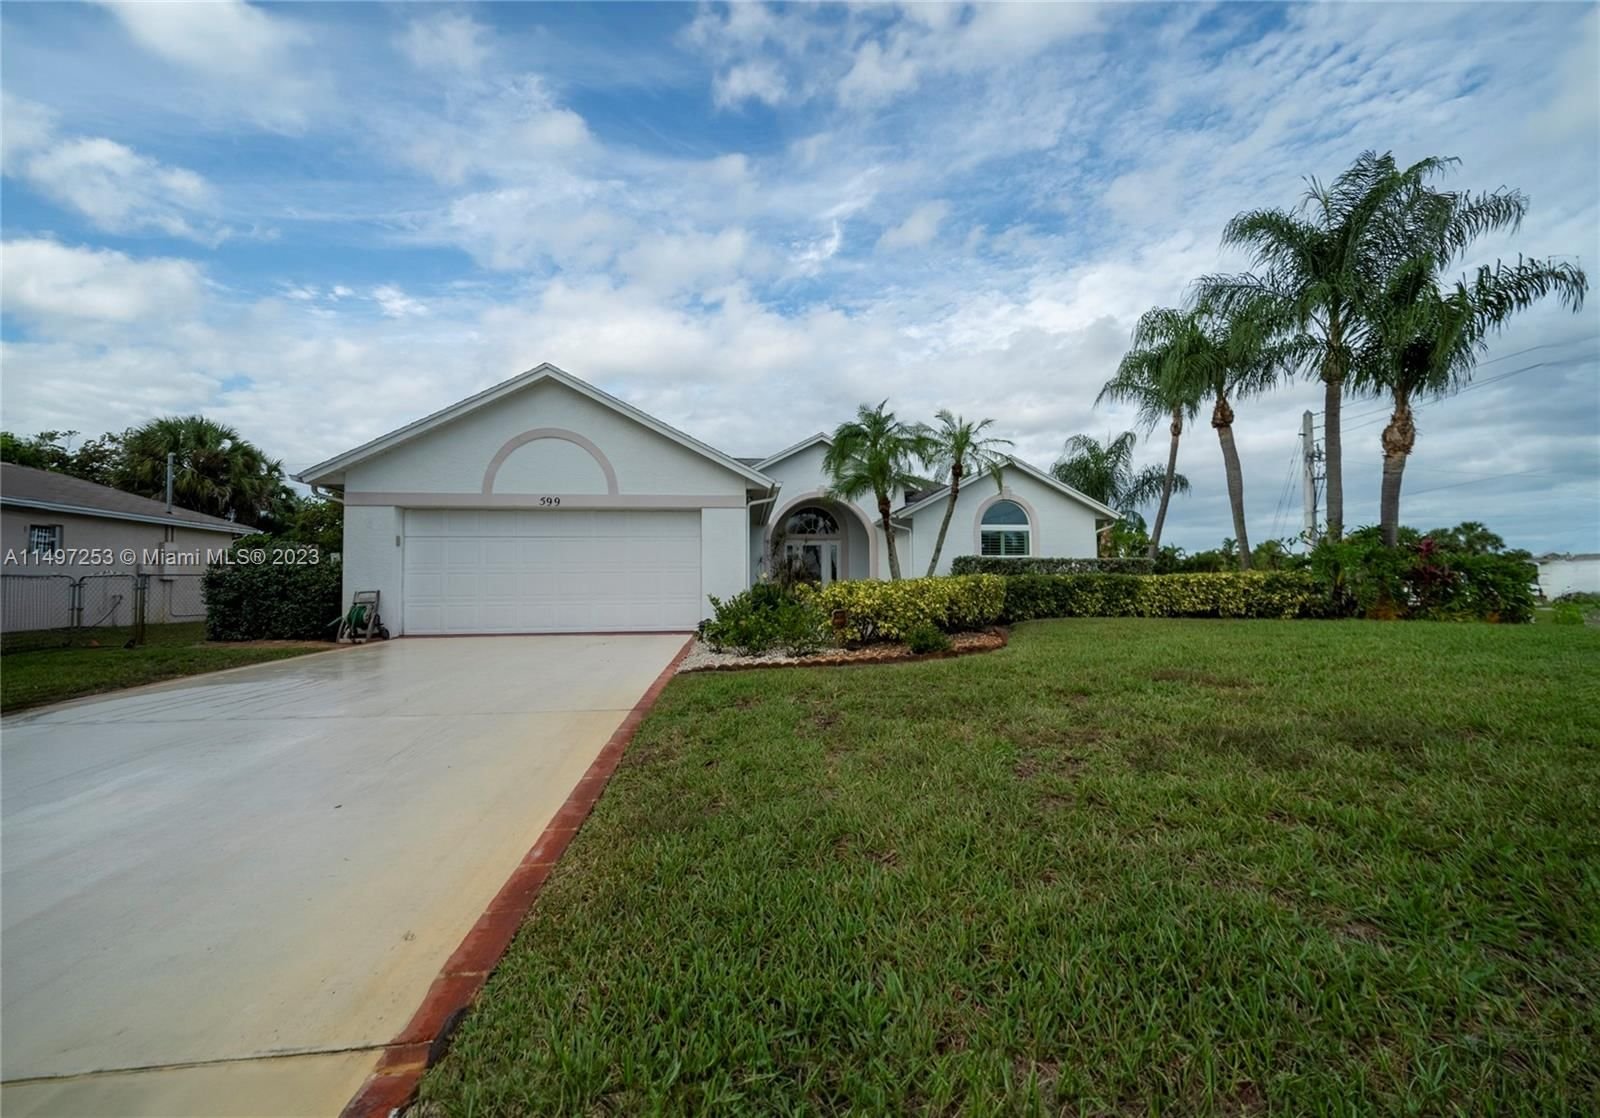 Real estate property located at 599 Wallace Ter, St Lucie County, PORT ST LUCIE SECTION 2, Port St. Lucie, FL